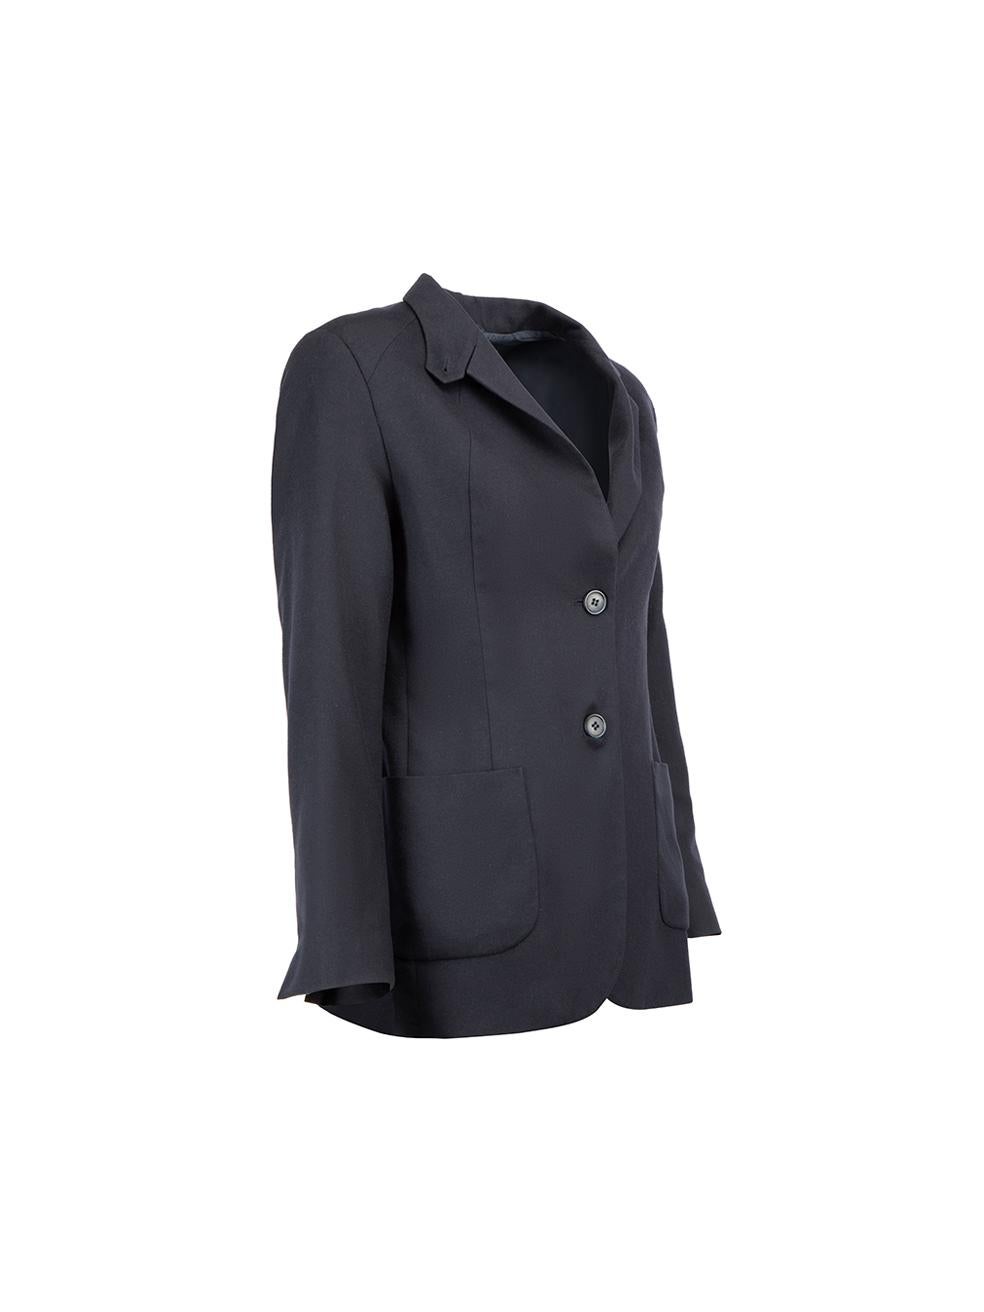 CONDITION is Very good. Minimal wear to blazer is evident. Minimal wear to right underarm with hole at the lining on this used Jil Sander designer resale item.



Details


Navy

Cashmere

Blazer

Long sleeved

Button up fastening

2x Front patch